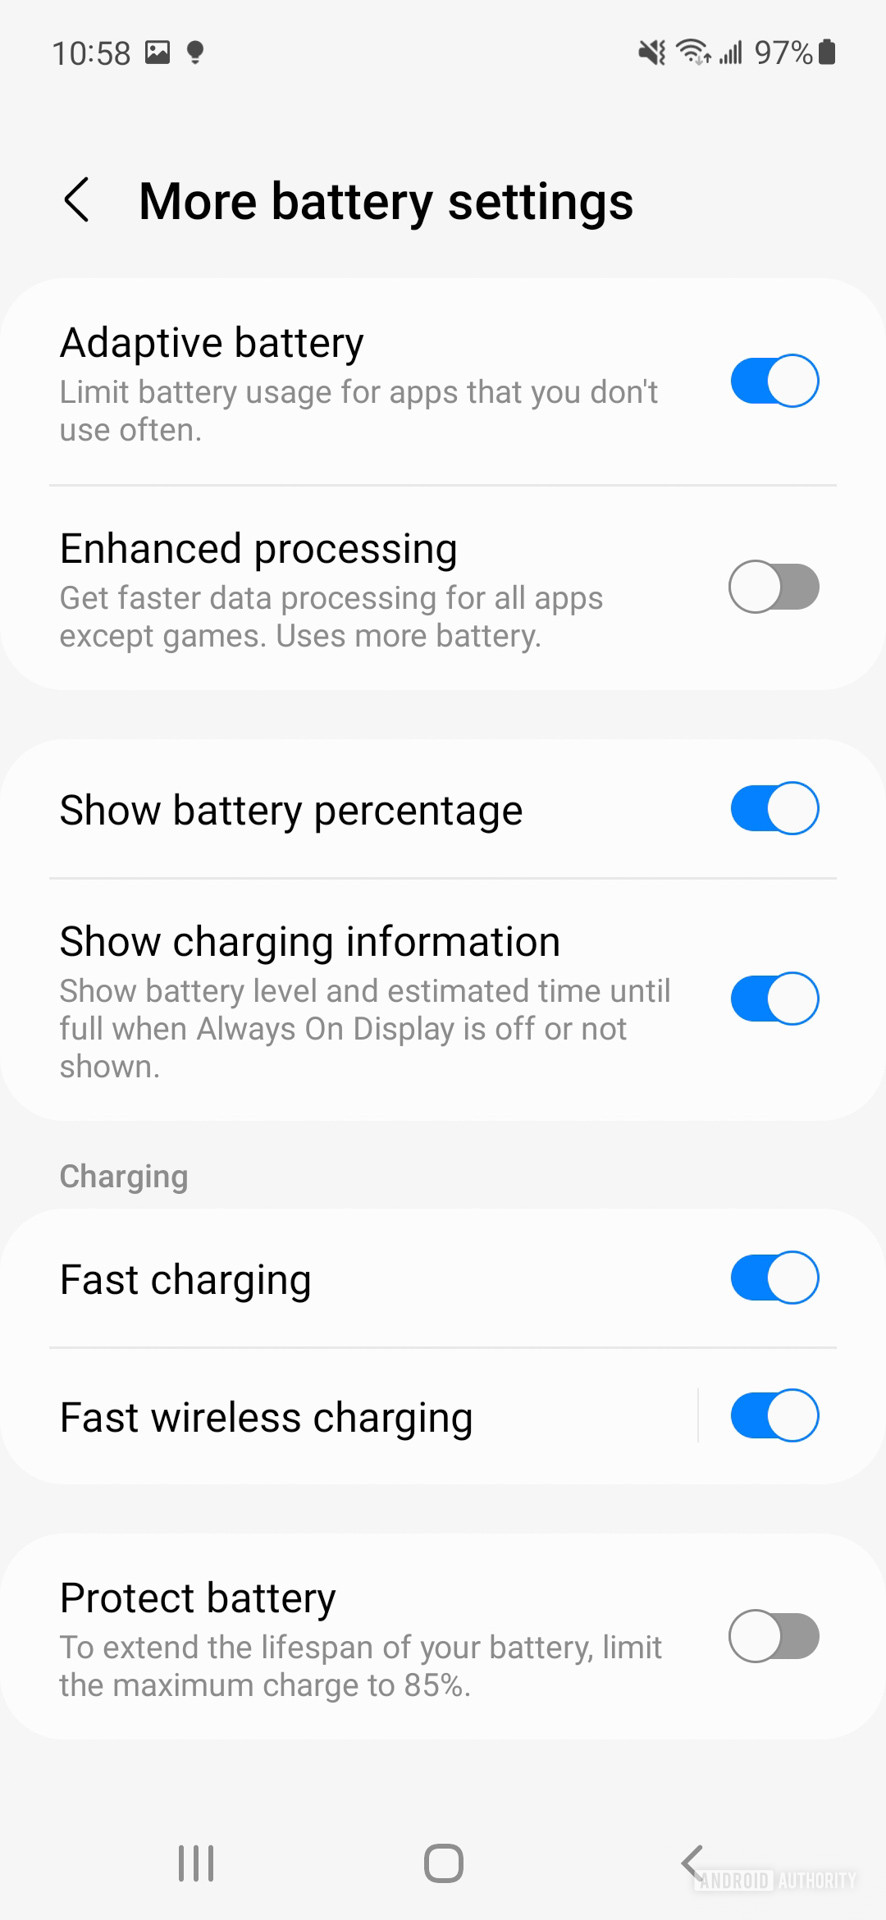 Samsung Galaxy S21 FE more battery settings